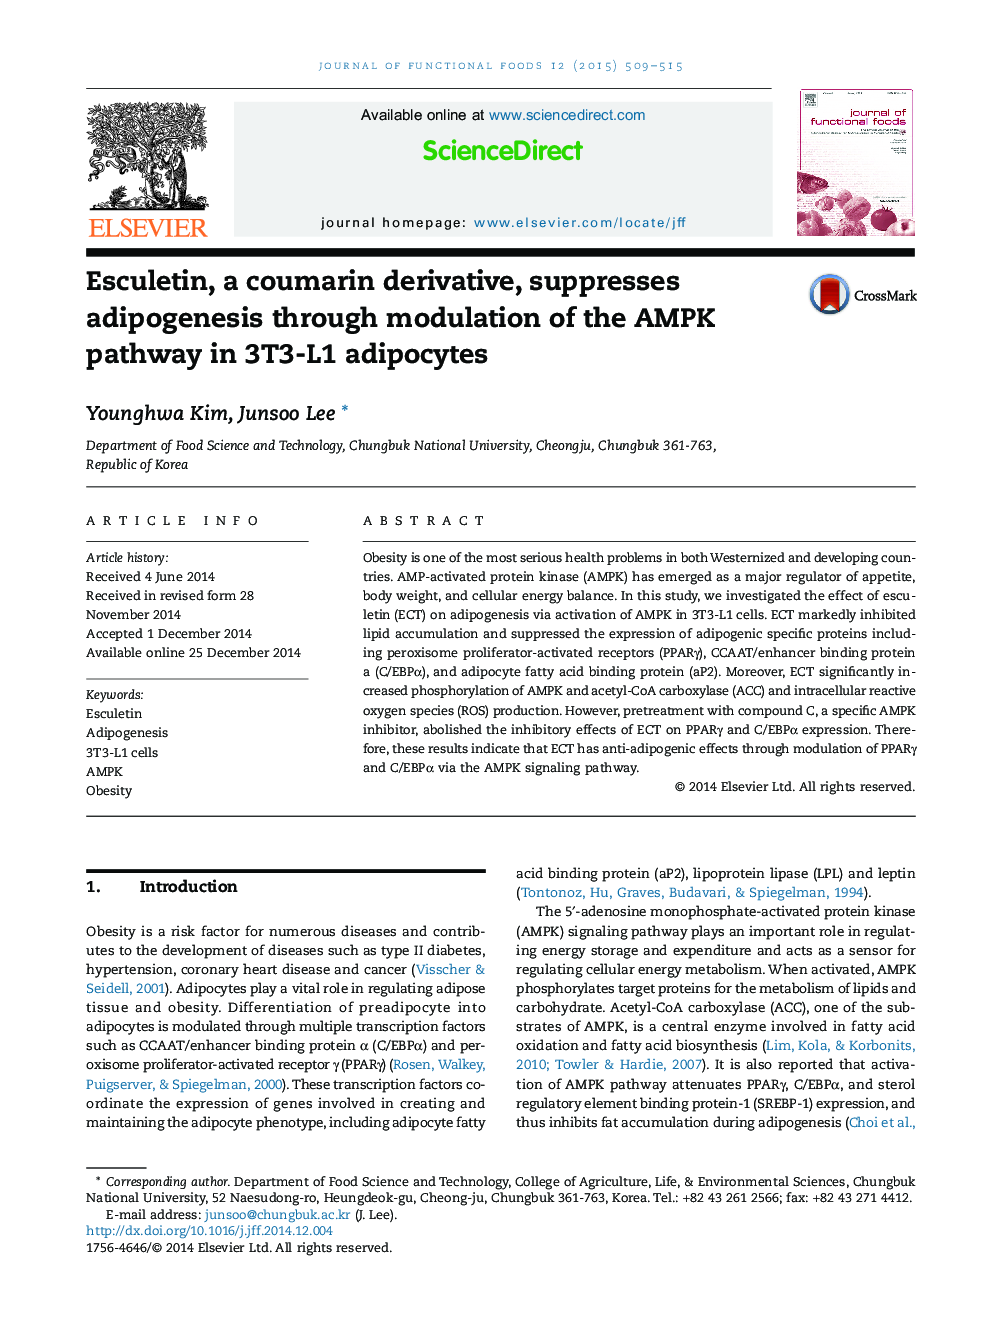 Esculetin, a coumarin derivative, suppresses adipogenesis through modulation of the AMPK pathway in 3T3-L1 adipocytes